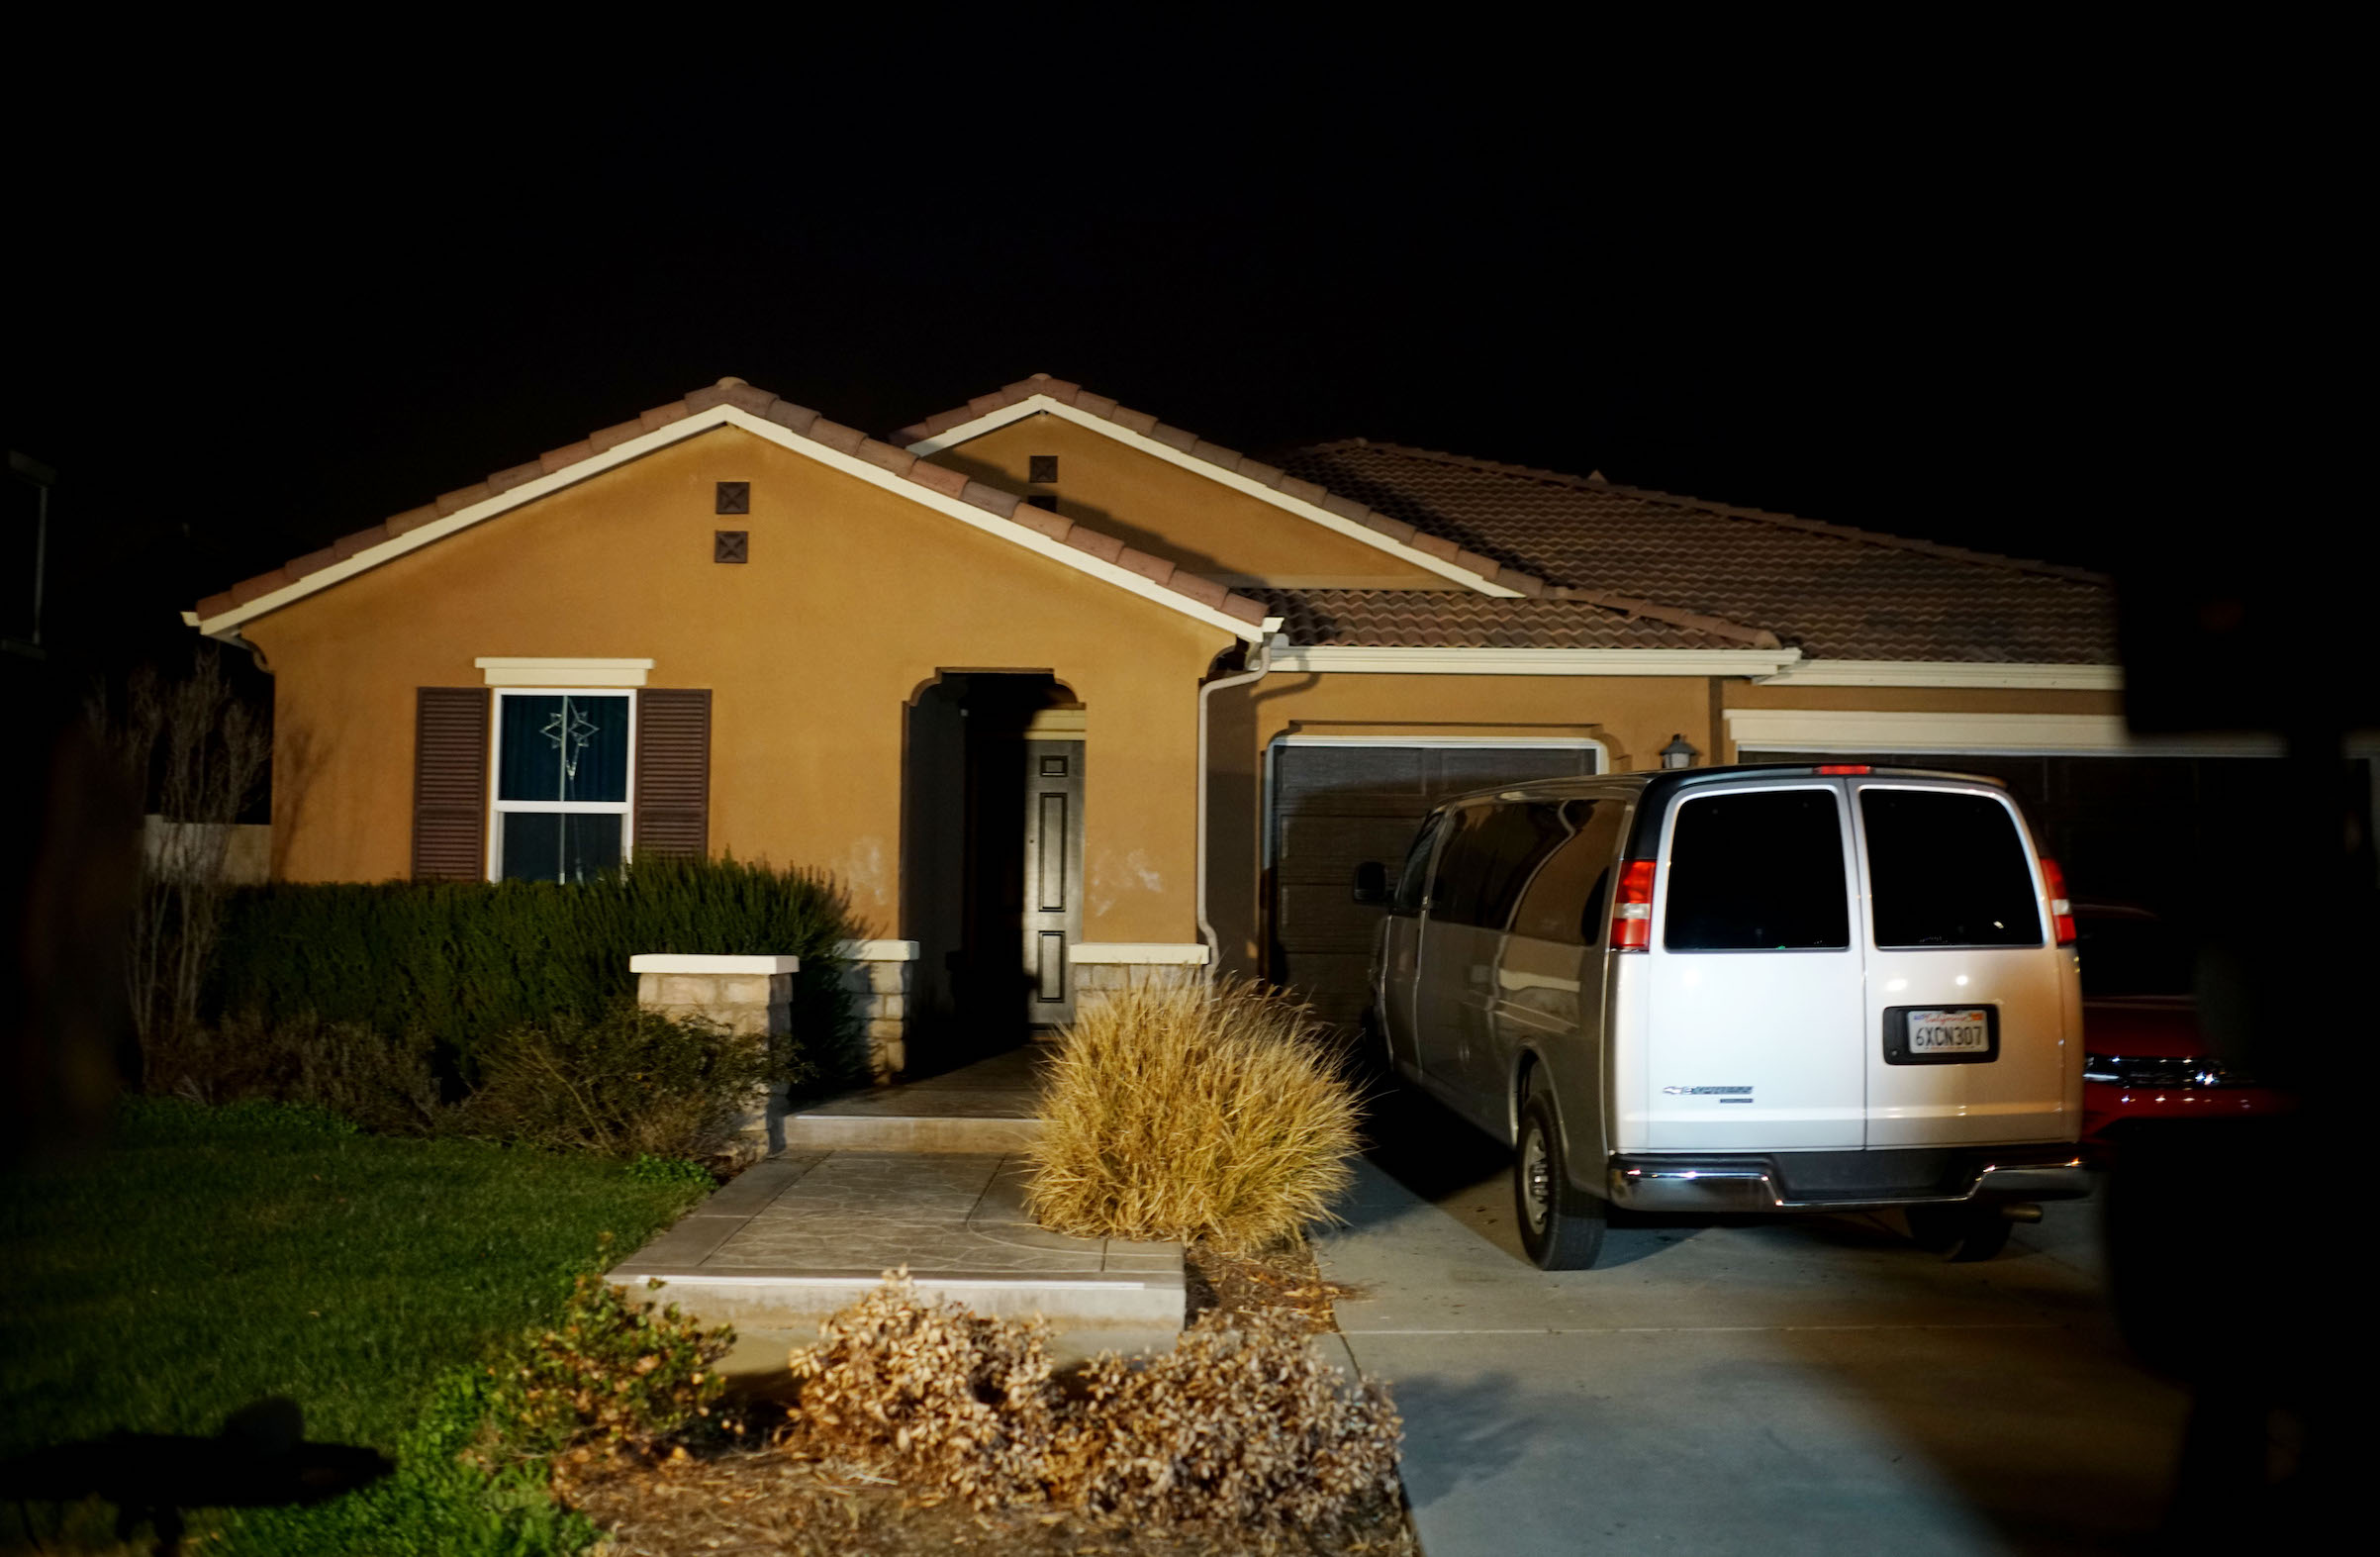 The home where a couple was arrested after police discovered that 13 people had been held captive is shown Jan. 15, 2018 in Perris, California. (Sandy Huffaker&mdash;Getty Images)